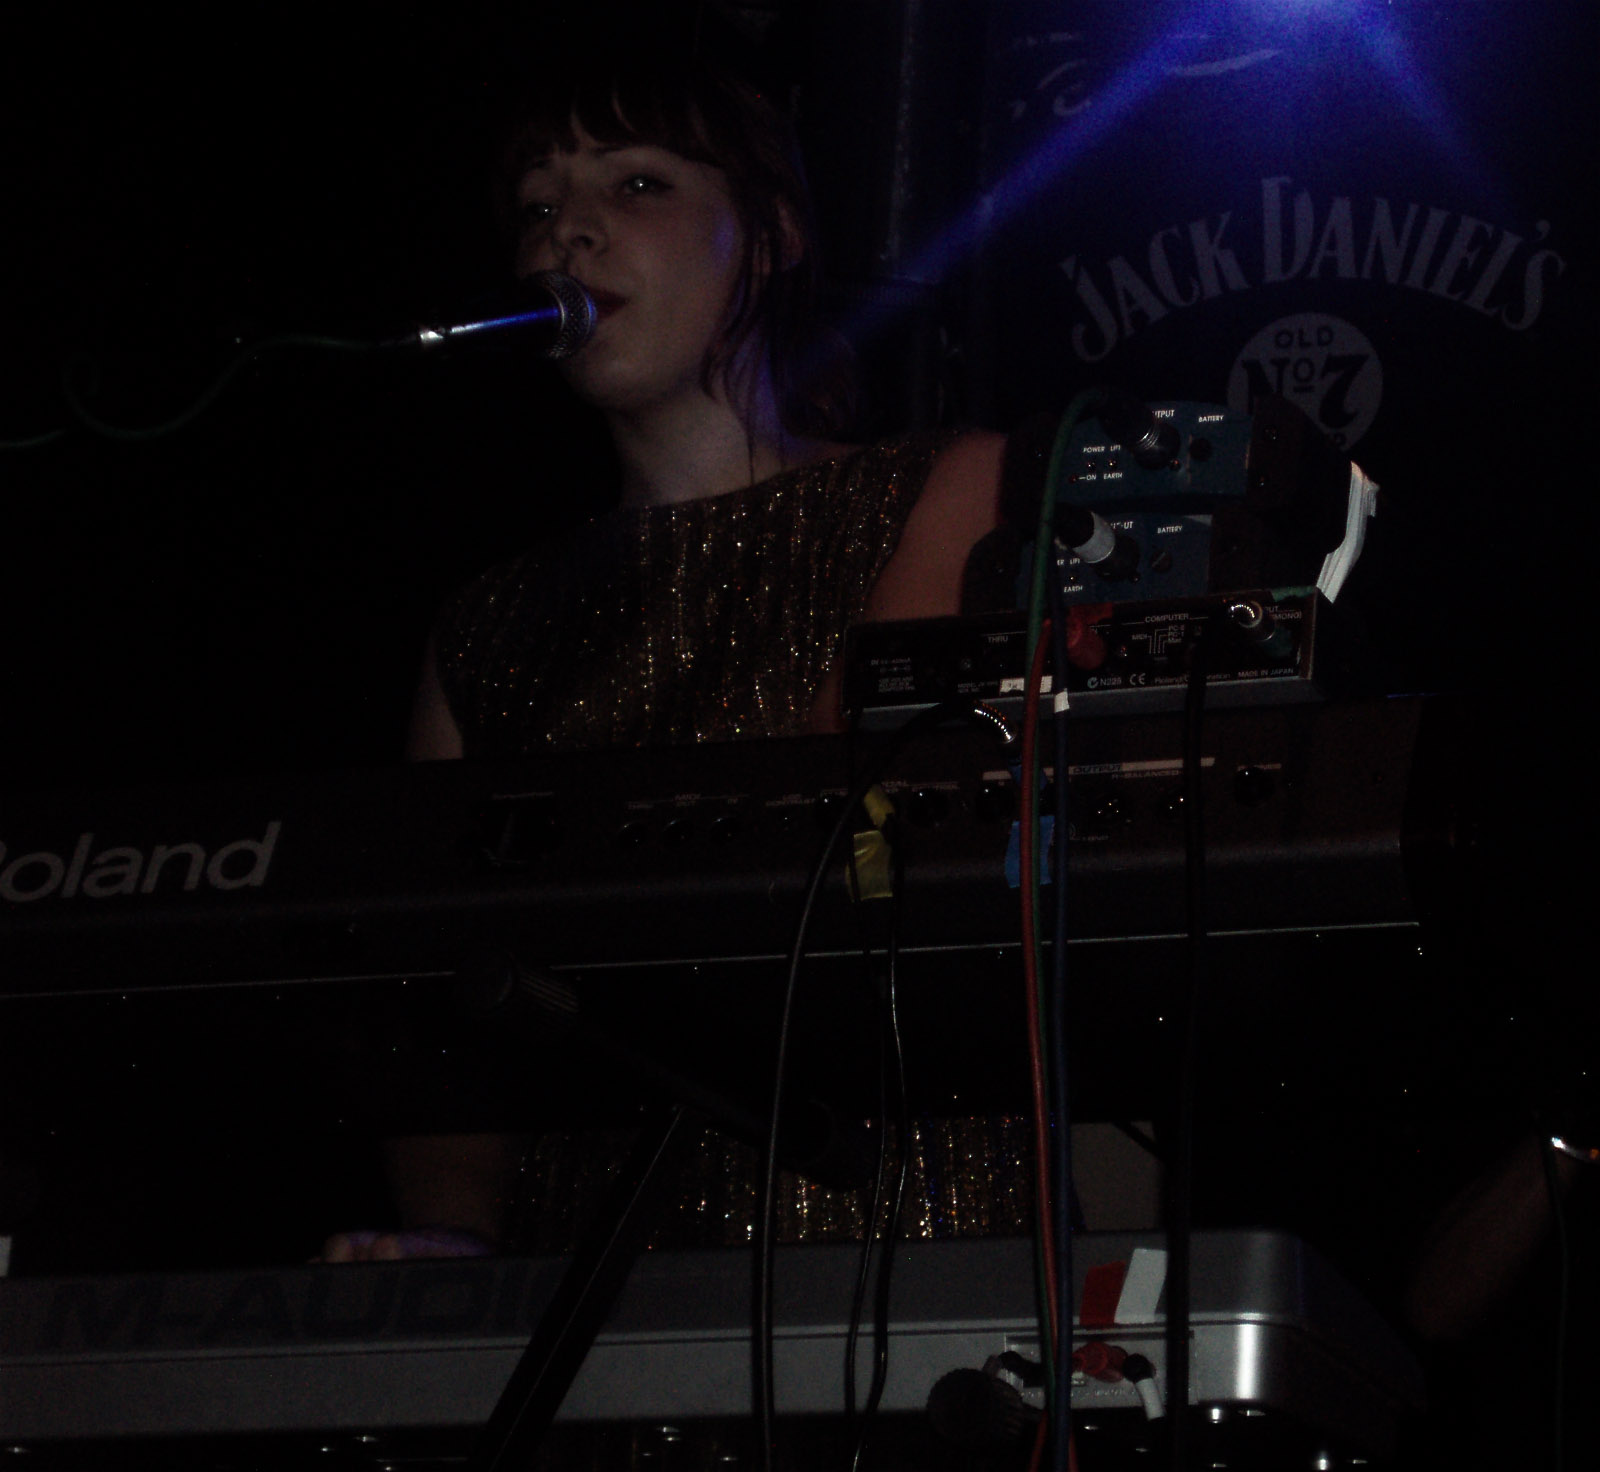 the woman is using a keyboard in front of the microphone